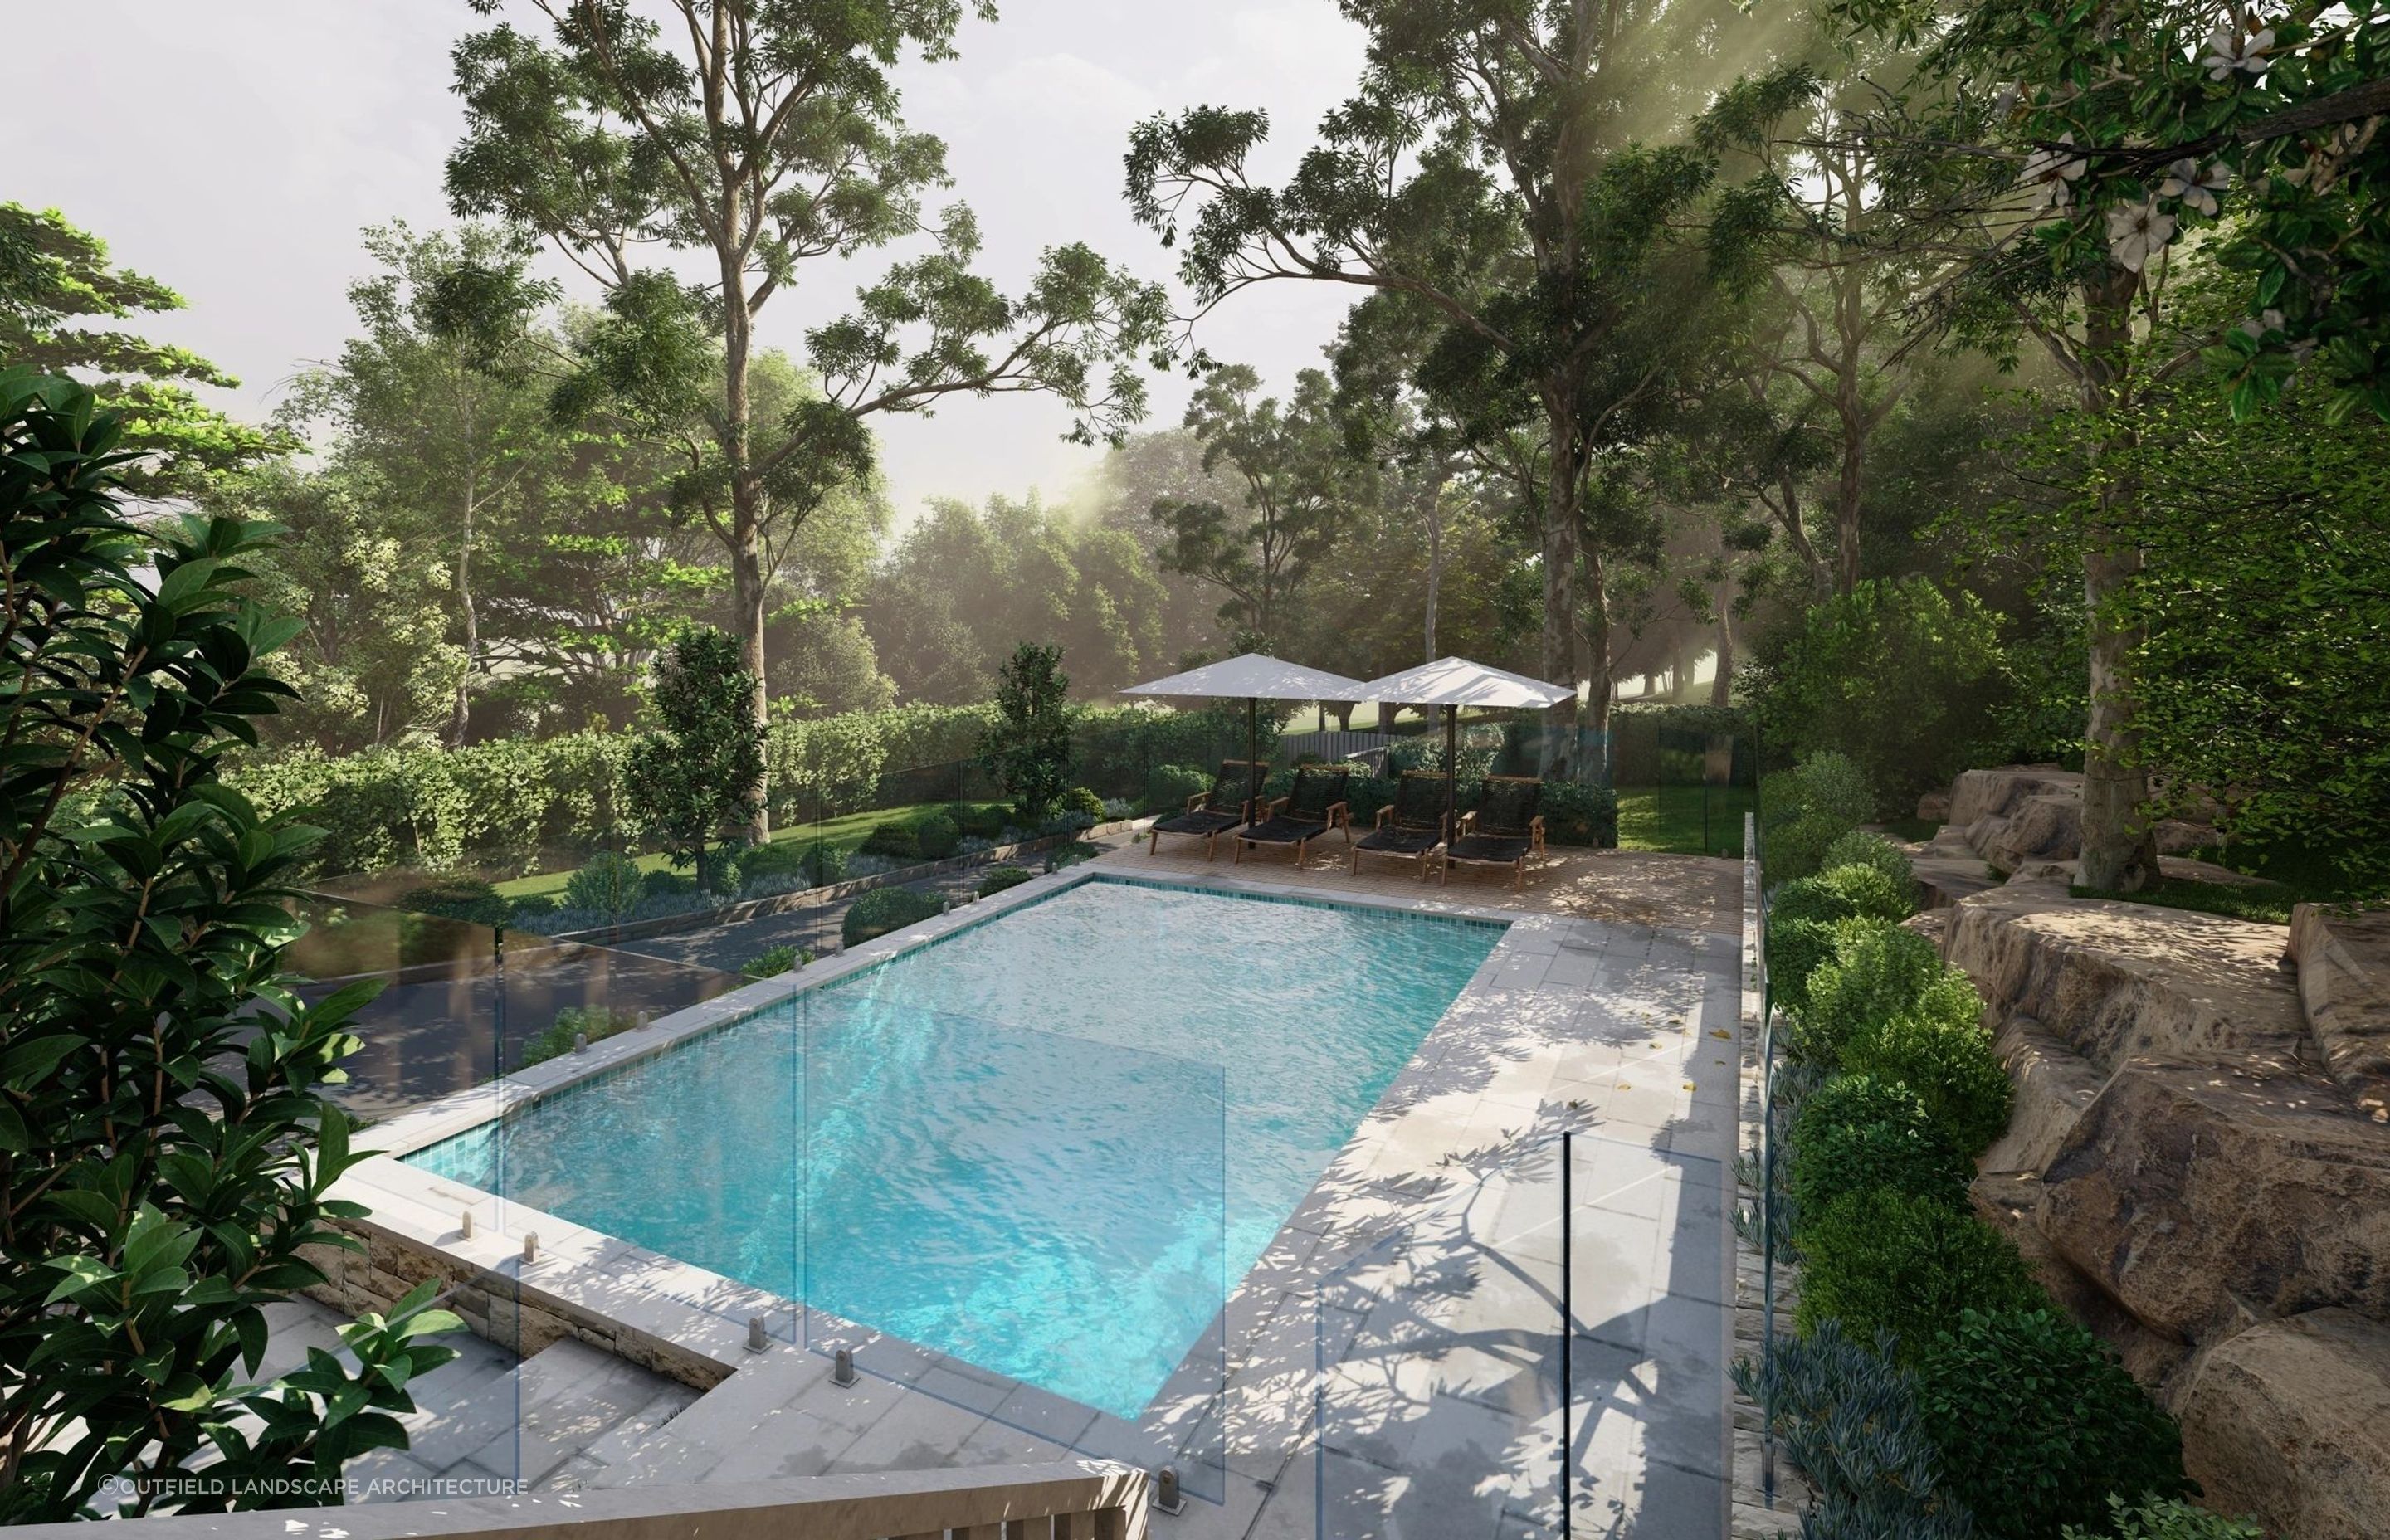 Trees provide adequate shade to this pool area, without completely blocking out natural light. Featured project: Caringbah South Residence - Outfield Landscape Architecture